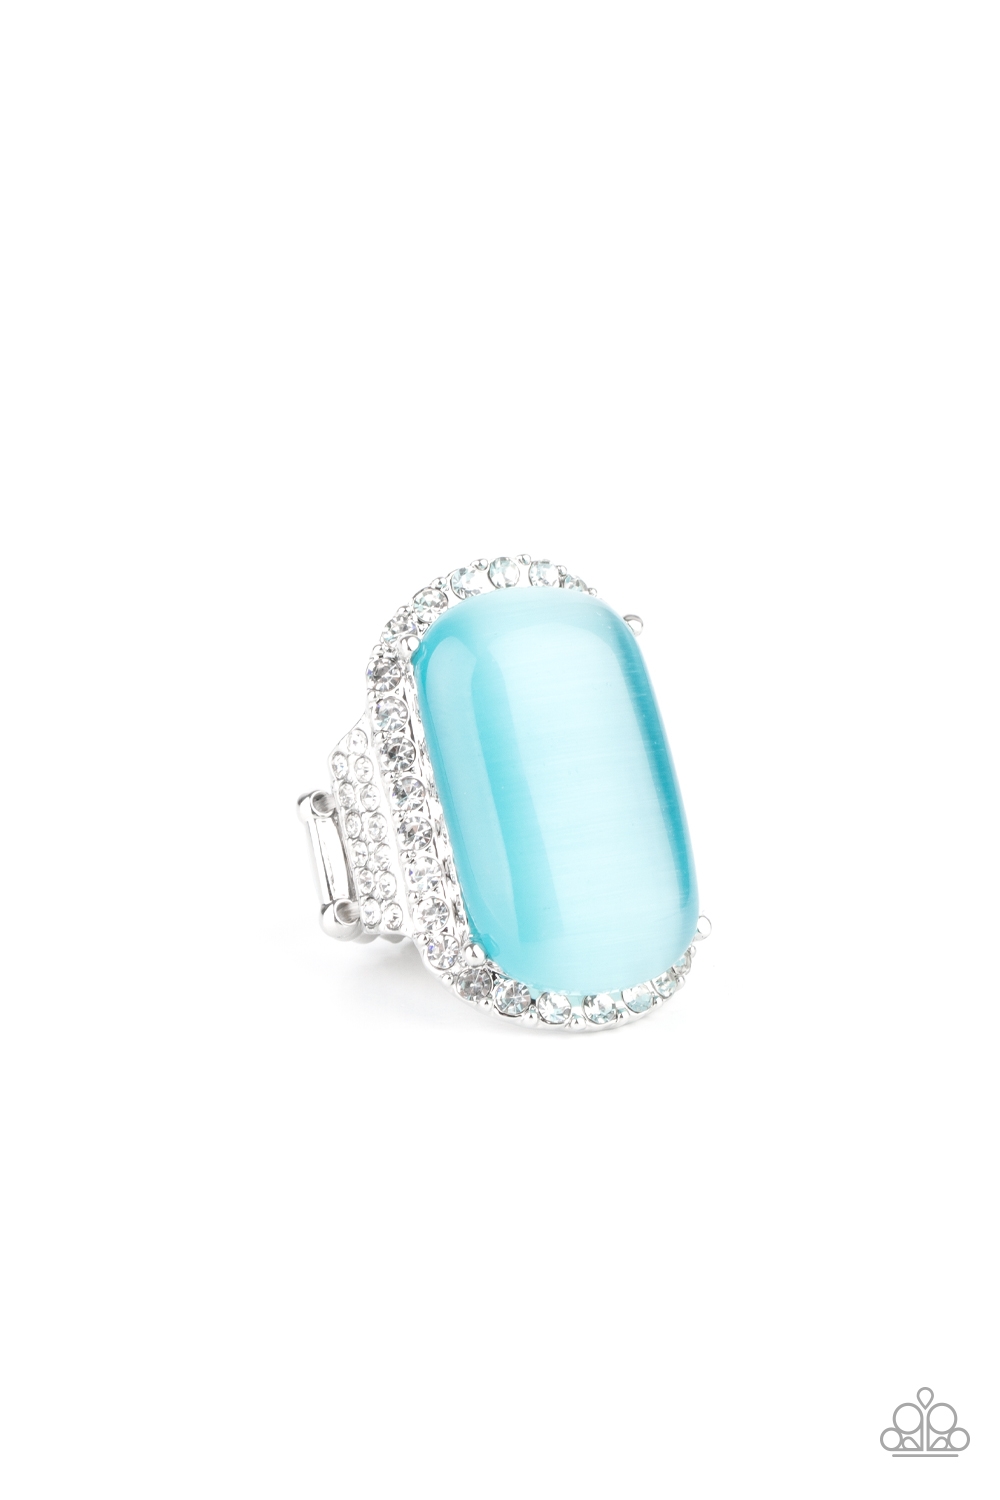 Ring - Thank Your LUXE-y Stars - Blue